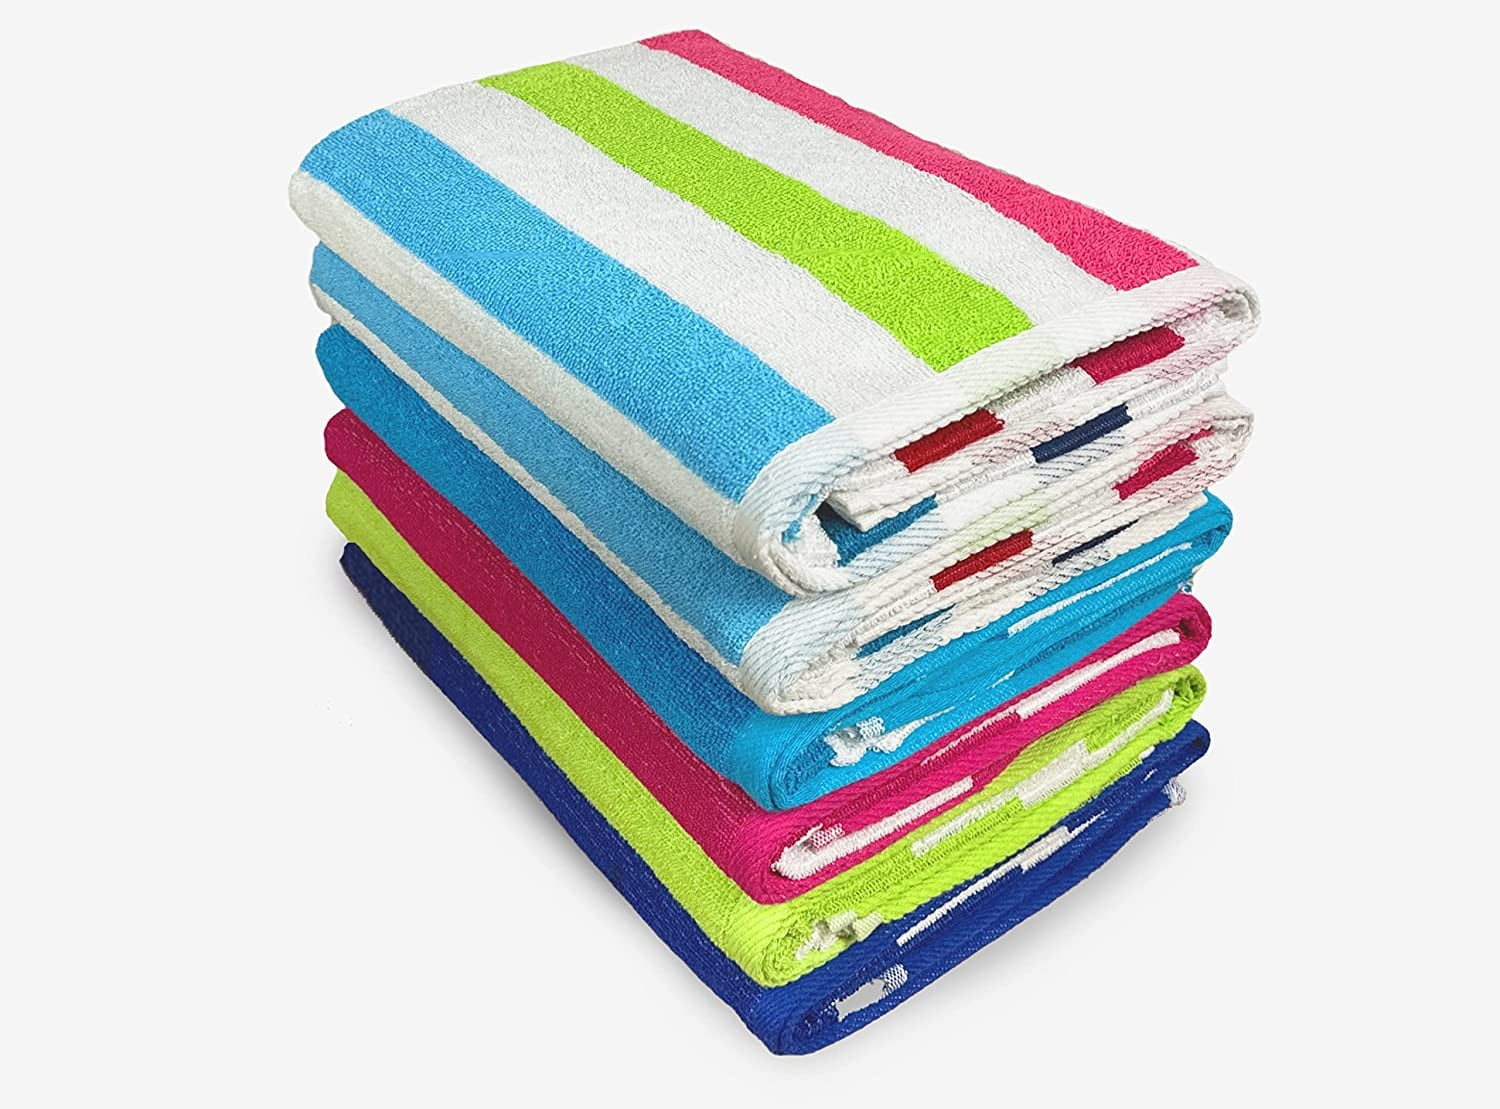 Beach Towel Set of 6 with Chair Band - 100% Cotton 39x70 - Oversized  Turkish Bath Towels 6 Pack - Quick Dry Sandfree Lightweight Large Giftable  Pool